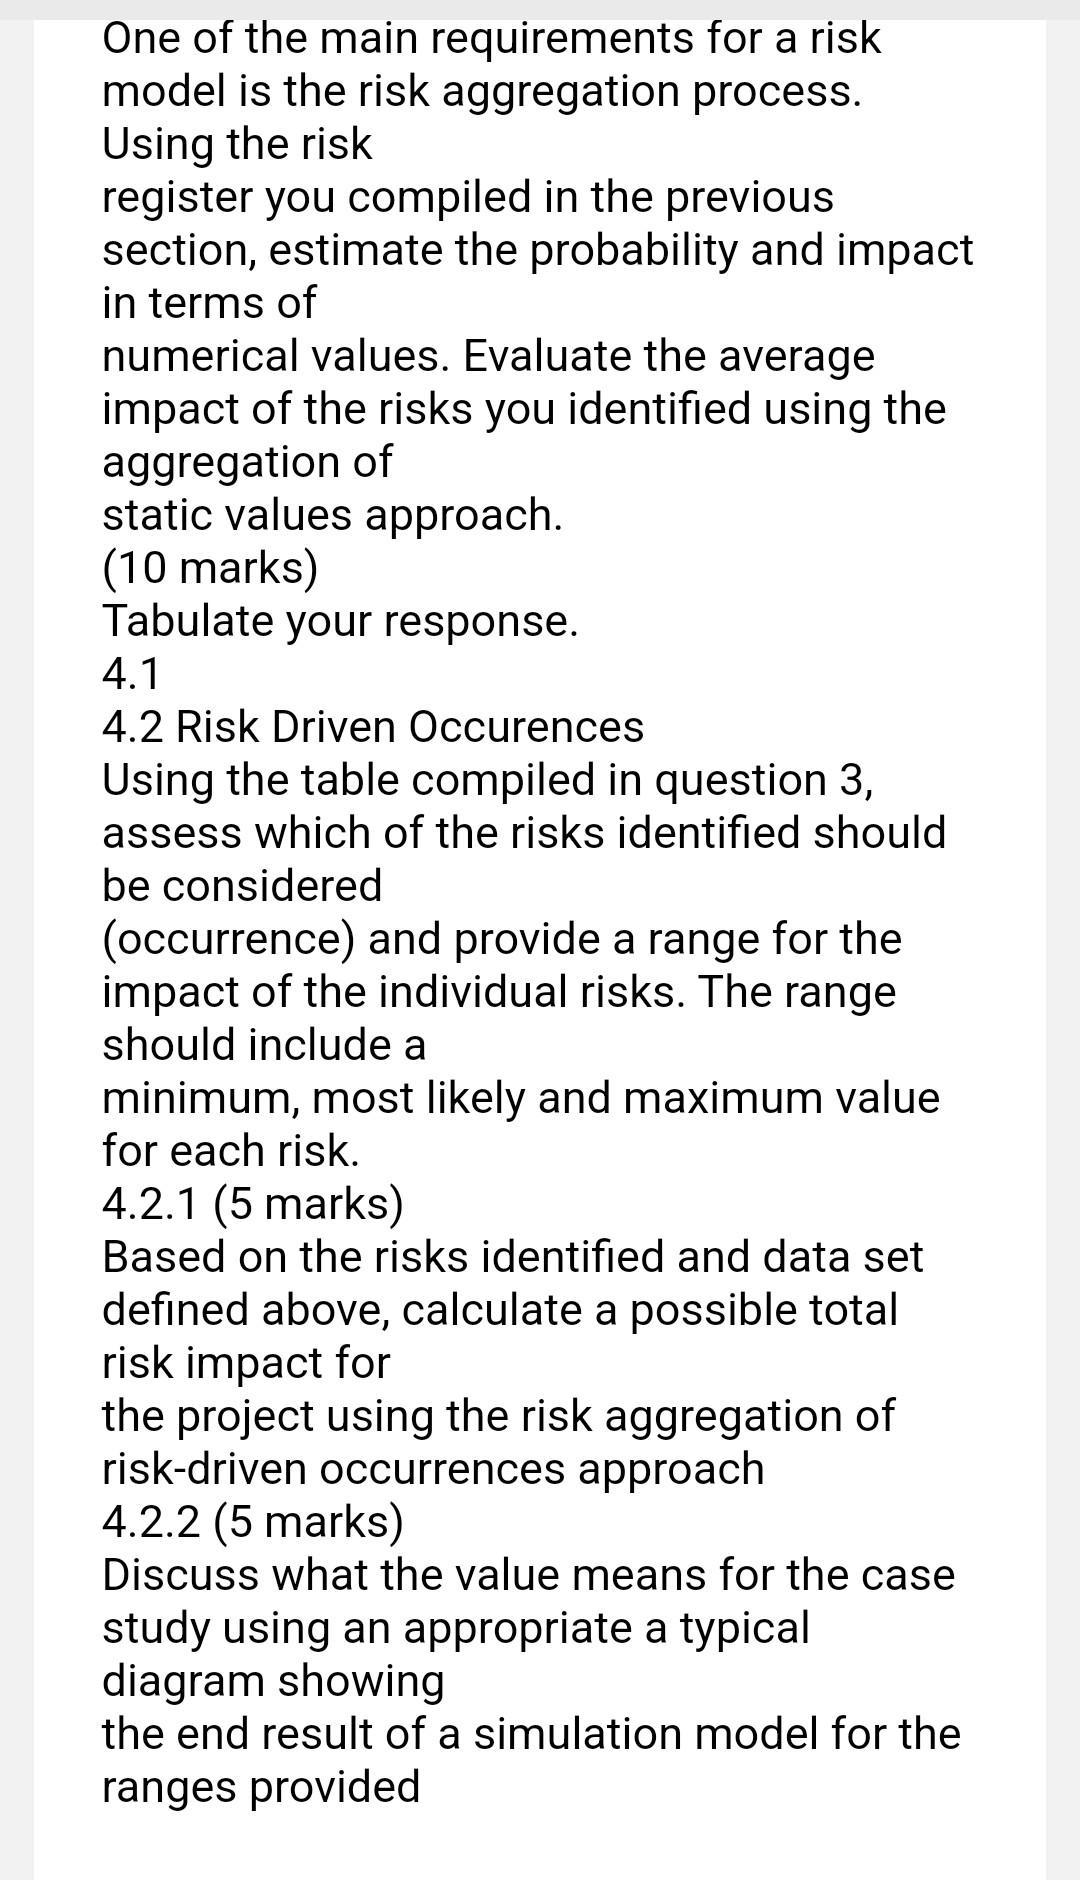 One of the main requirements for a risk model is the risk aggregation process. Using the risk register you compiled in the pr